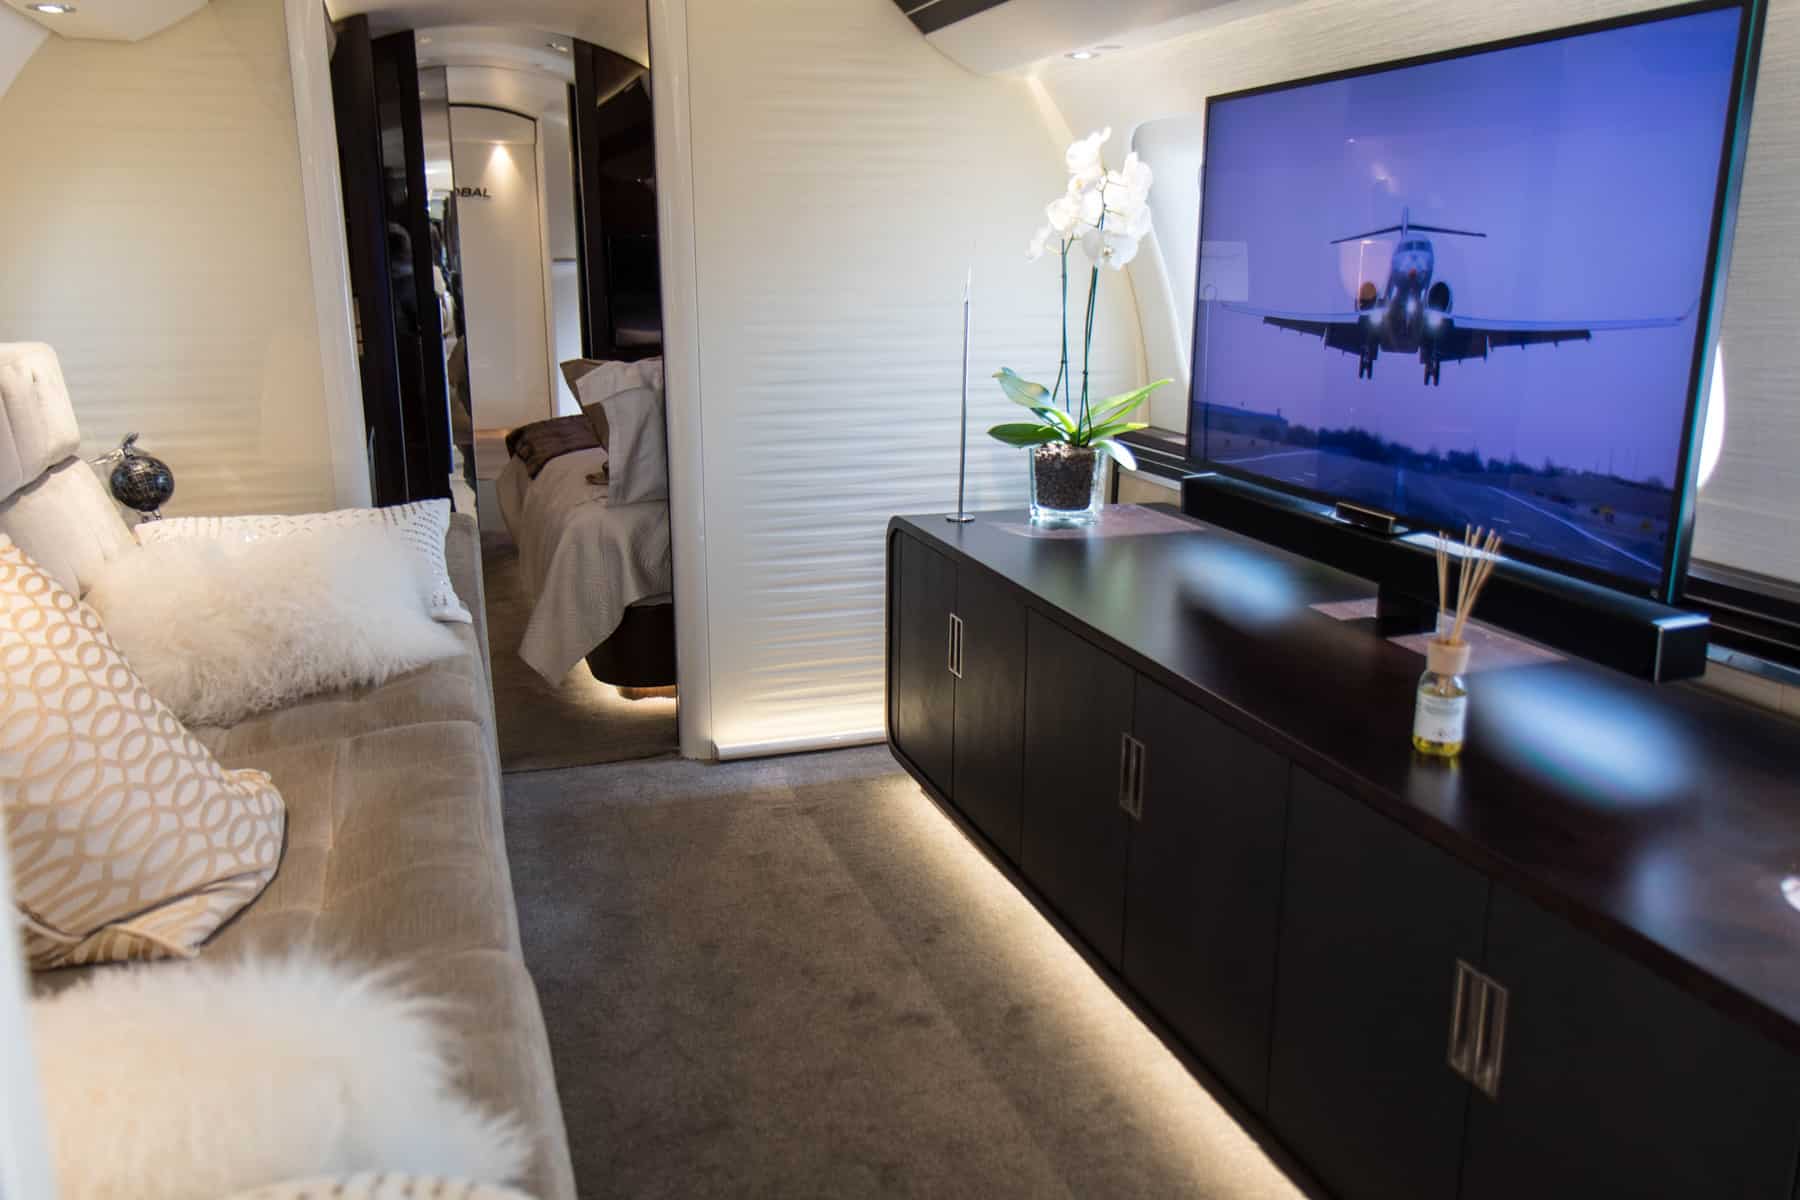 PICTURE OF GLOBAL 7500 ENTERTAINMENT SUITE